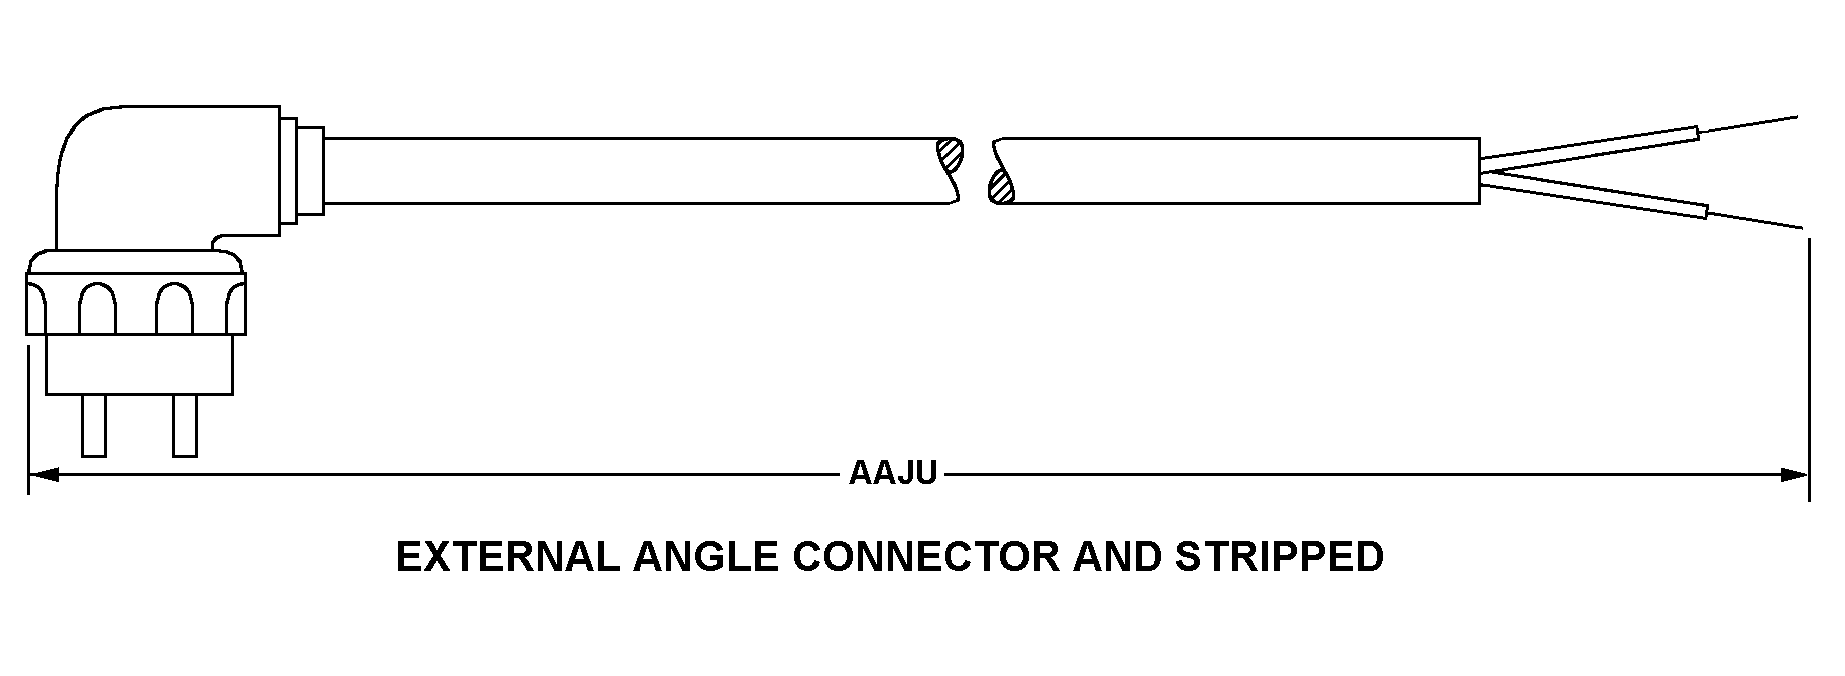 EXTERNAL ANGLE CONNECTOR AND STRIPPED style nsn 5995-01-448-1552